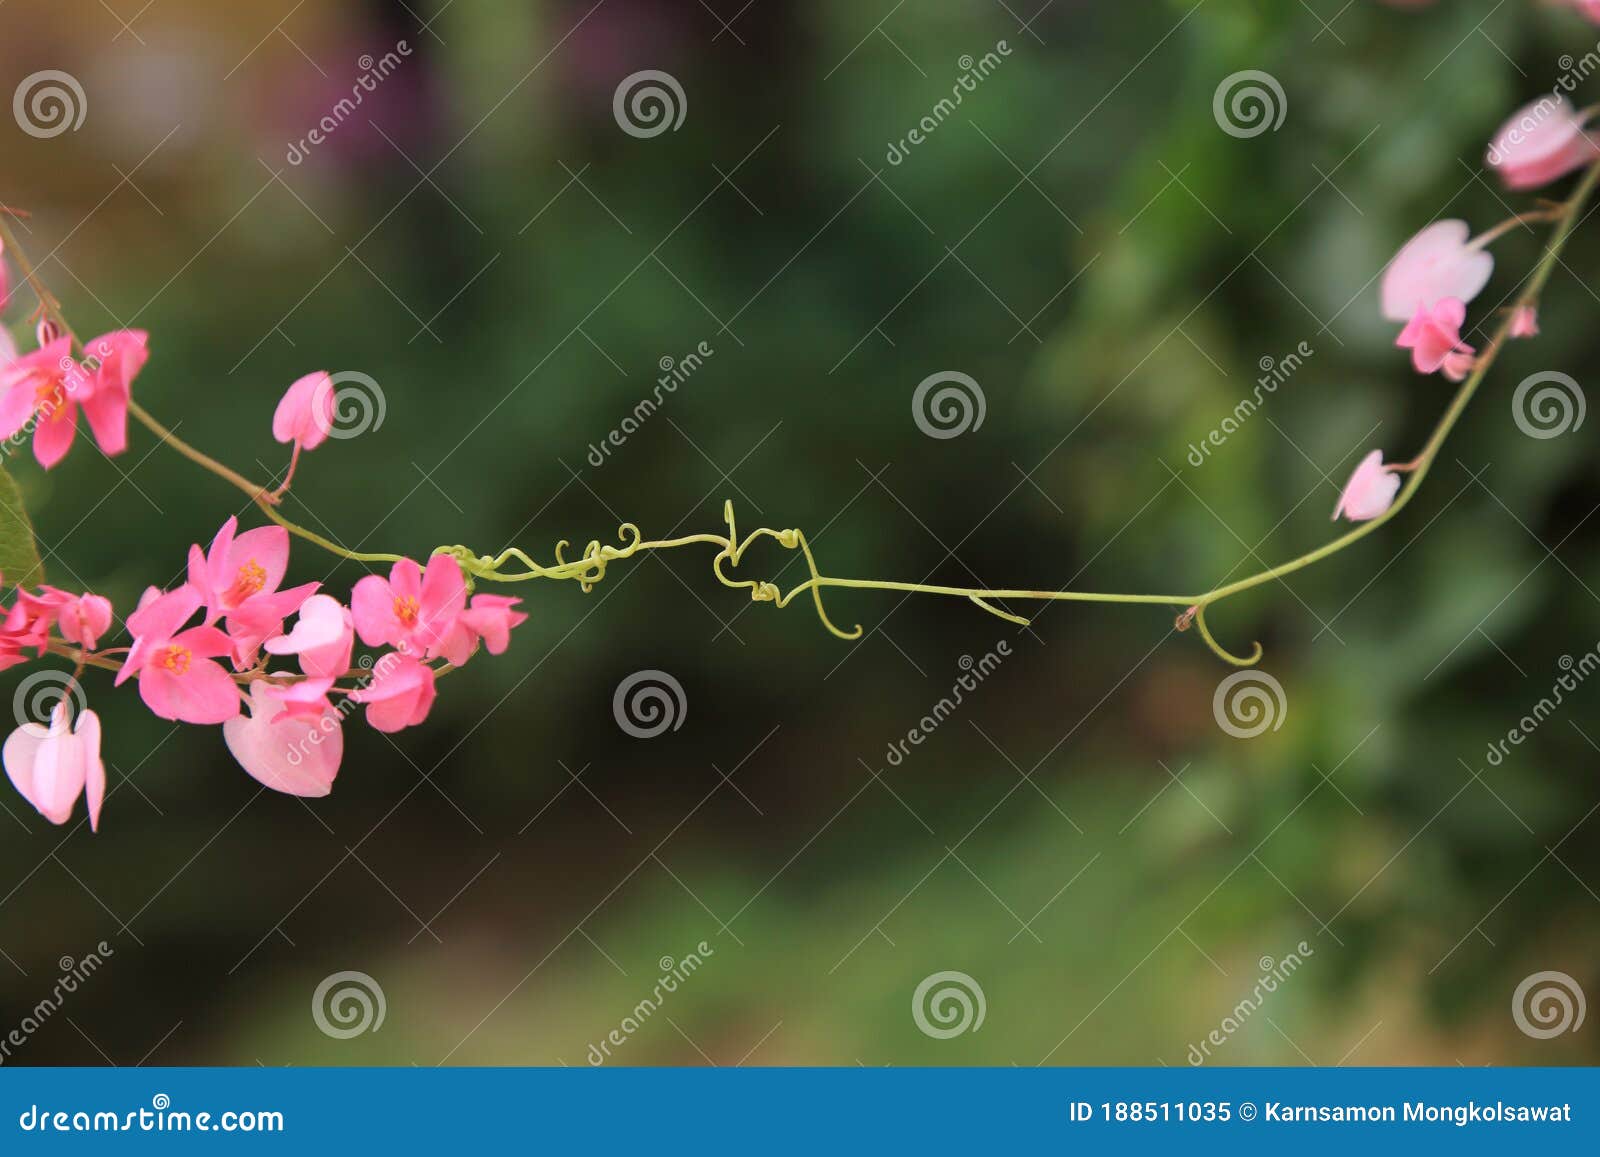 Pink Coral Vine Or Mexican Creeper Or Chain Of Love Flowers Antigonon Leptopus Hook Arn Categories Species Of Polygonaceae Stock Image Image Of Greeting Hold 188511035